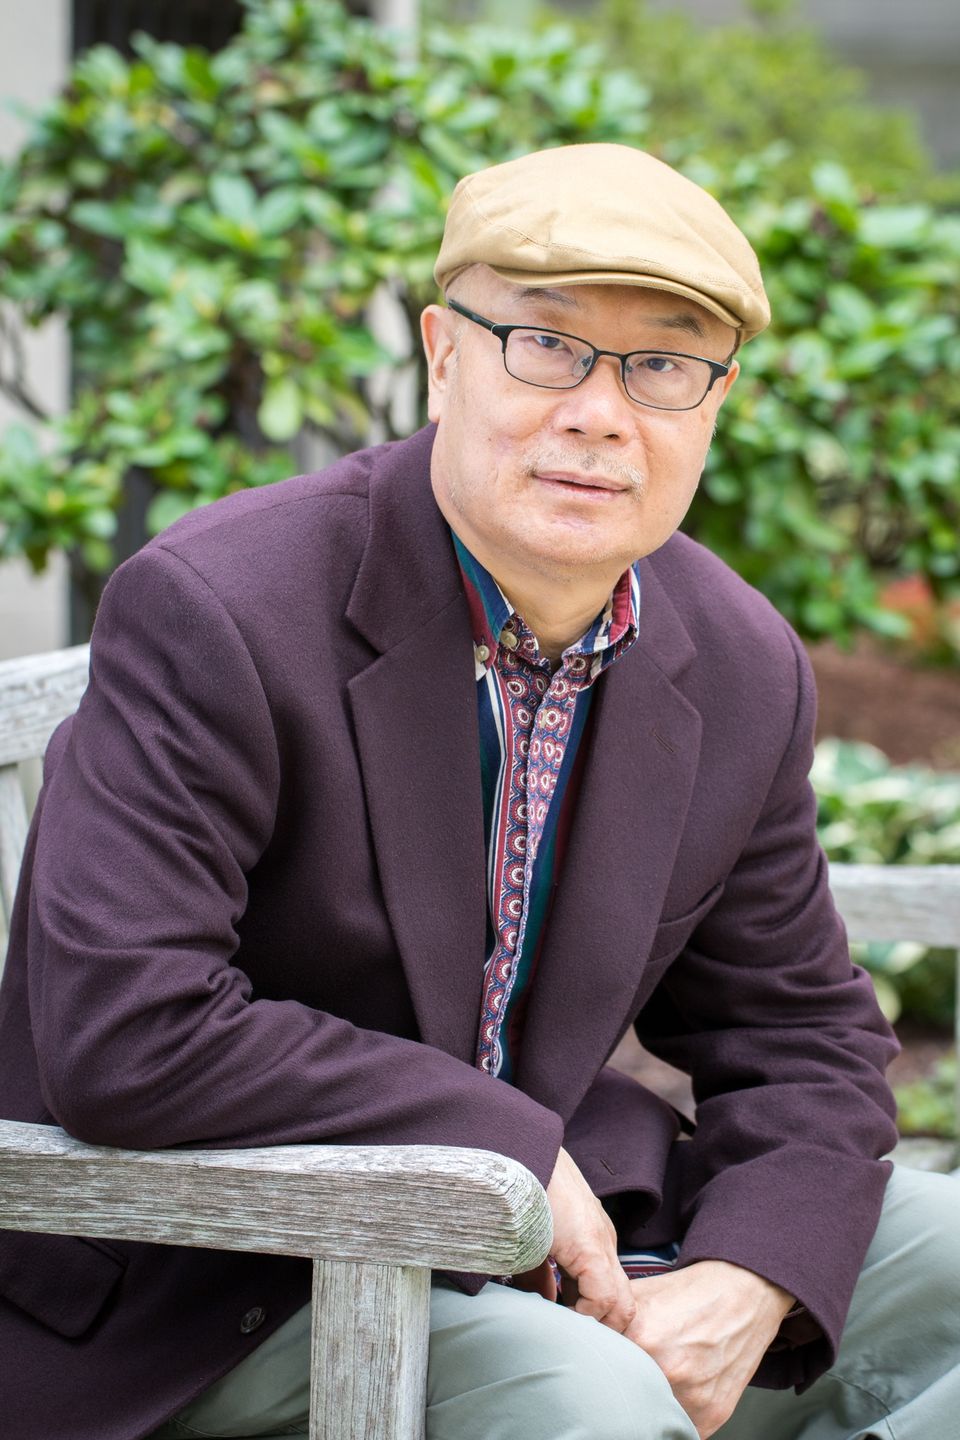 A man wearing a stylish flat cap and eyeglasses, casually relaxing on a bench surrounded by lush green plants.